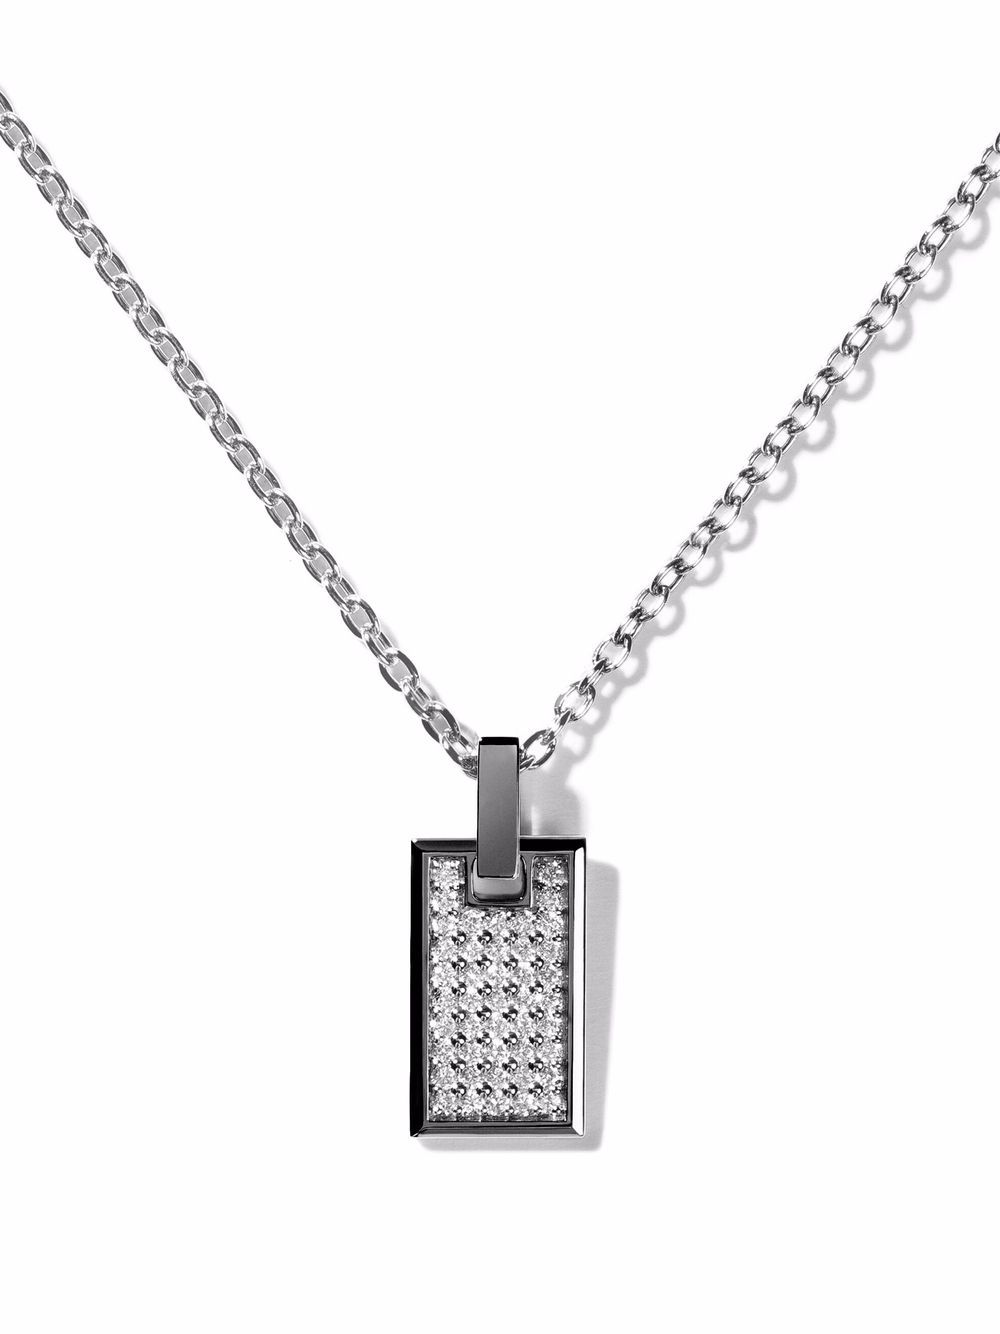 AS29 18kt gold small Tag diamond rectangle pendant necklace